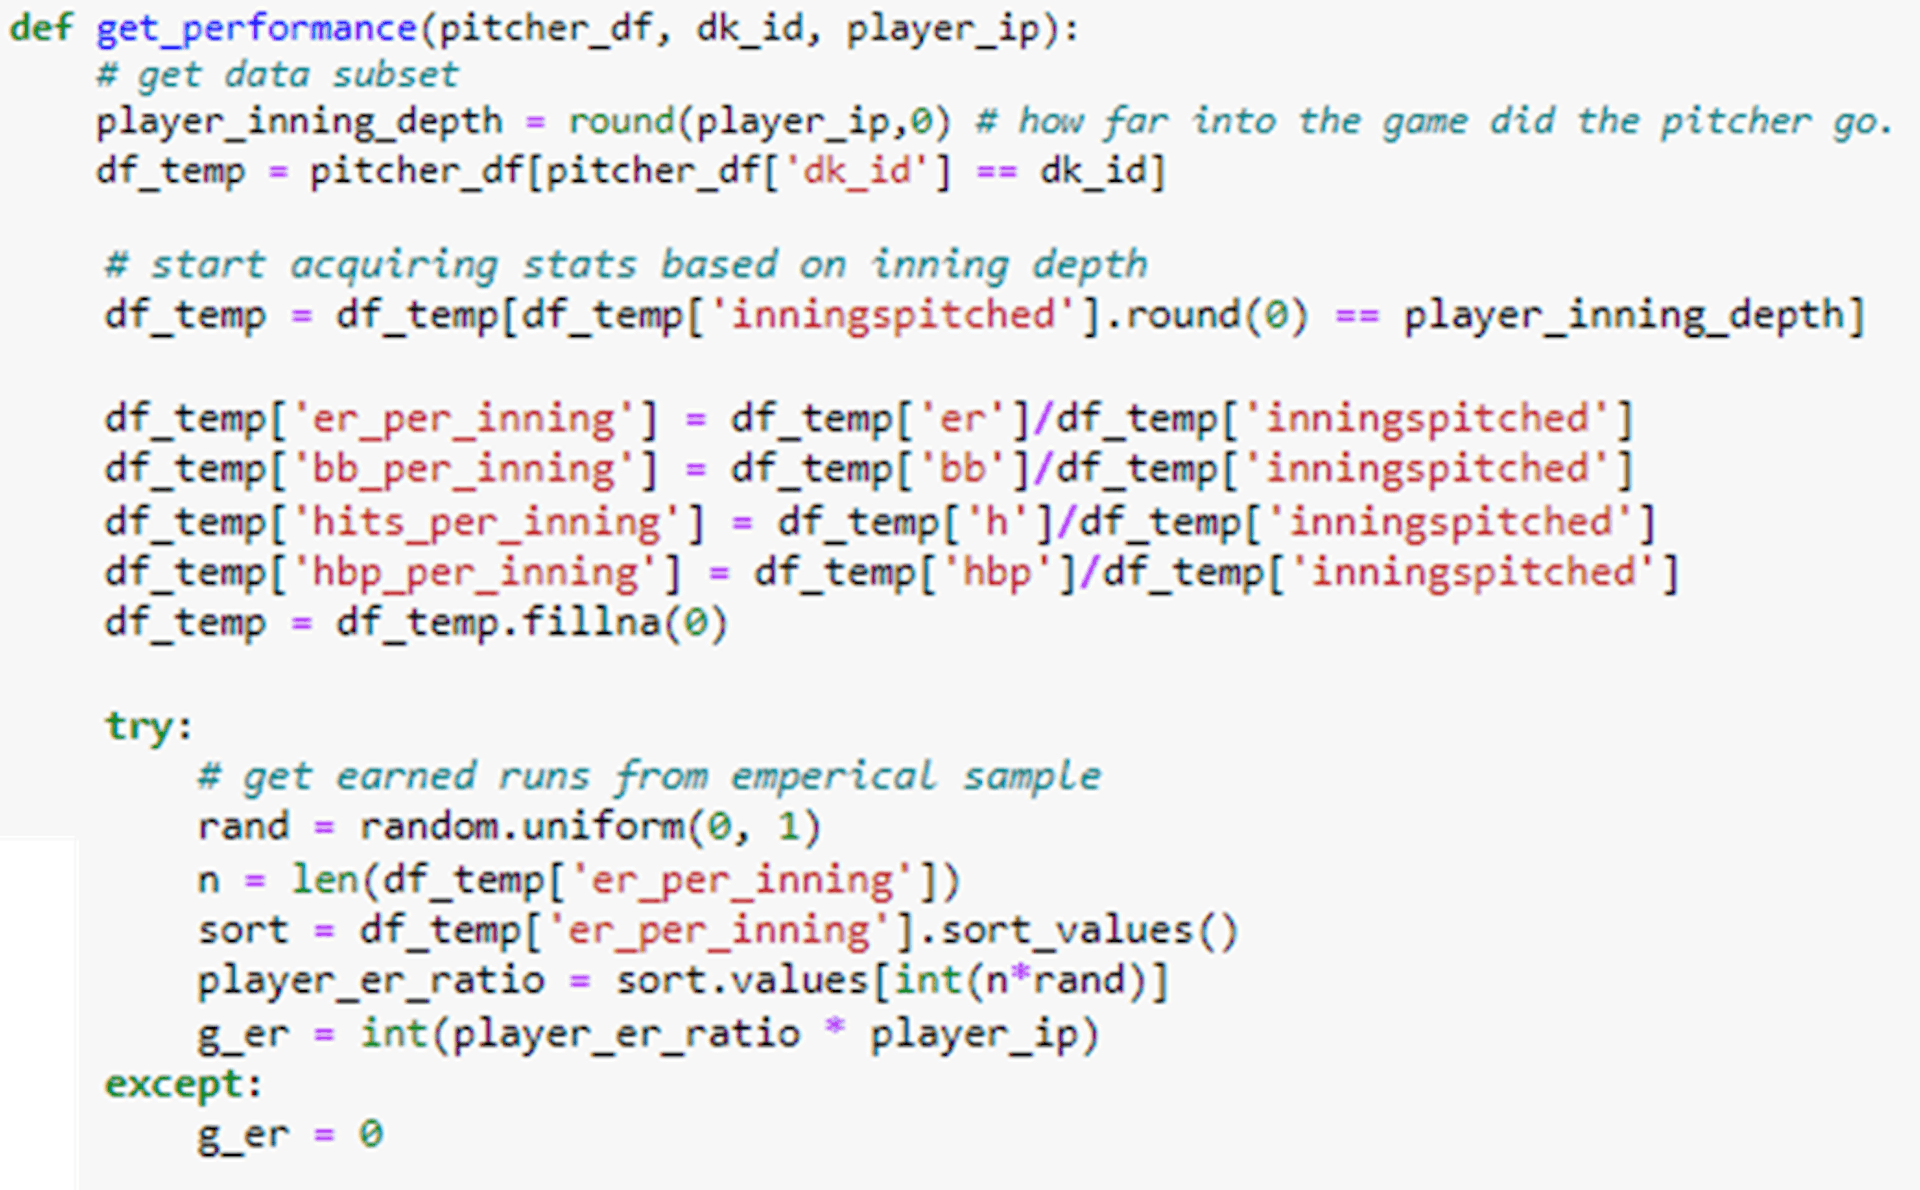 Image by Author: Python code to return earned runs as a function of innings pitched.